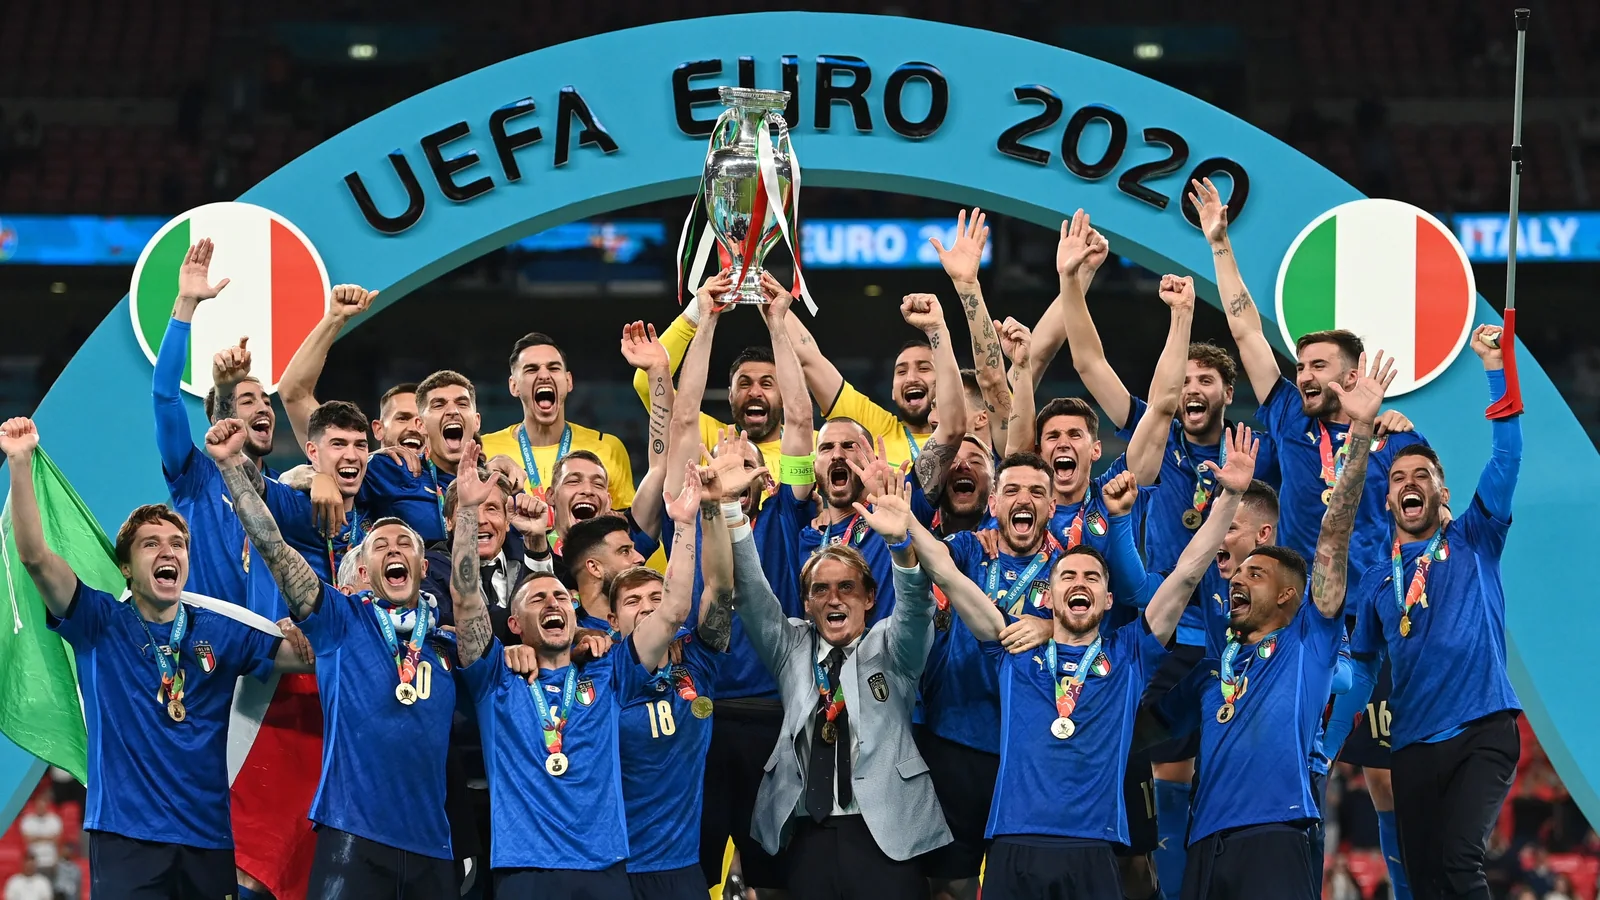 Italy! The Champions! The summary of the whole tournament.